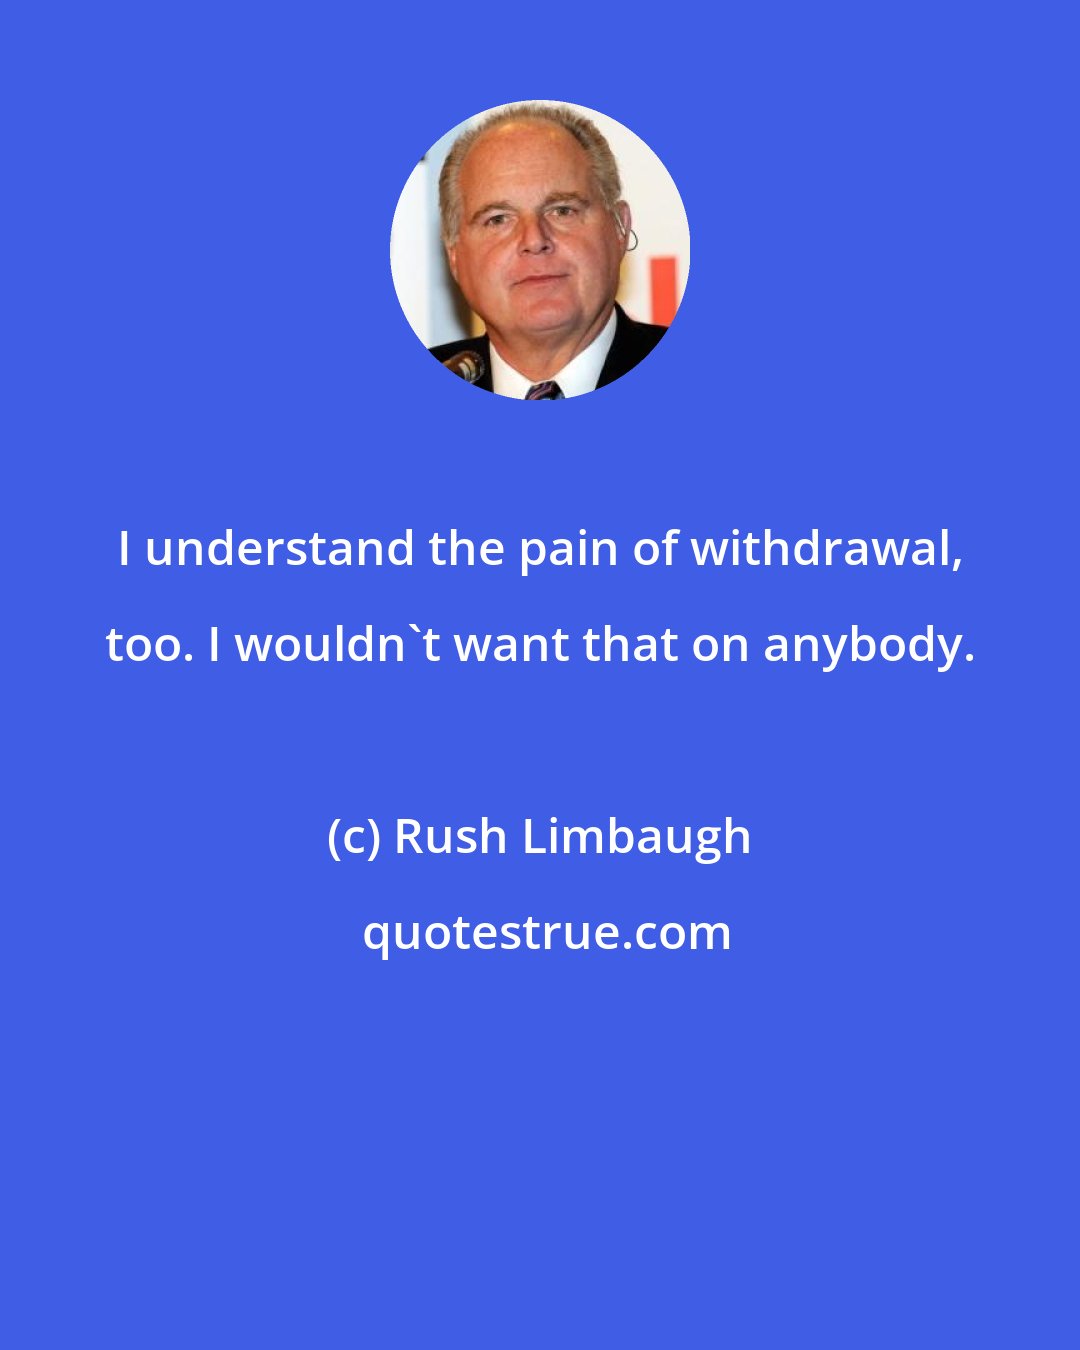 Rush Limbaugh: I understand the pain of withdrawal, too. I wouldn't want that on anybody.